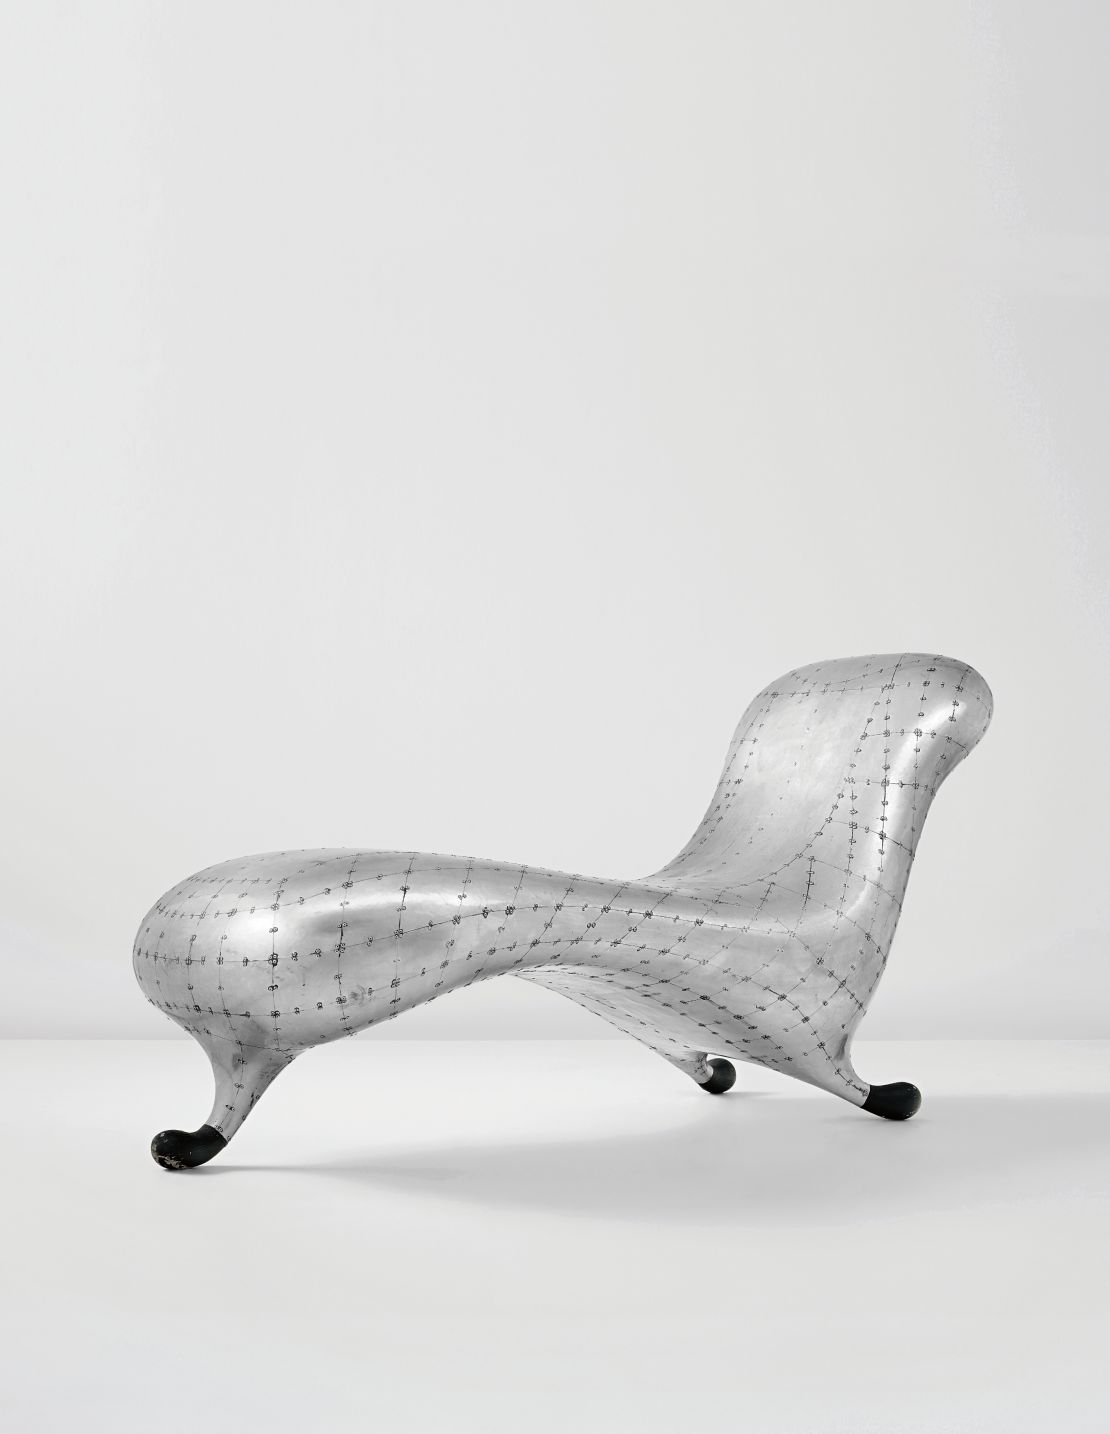 Marc Newson's Lockheed Lounge chair sold for £2.43 million ($3.74 million) at a Phillips auction in London in April 2015, setting a new record for the most expensive piece of contemporary design ever sold. 